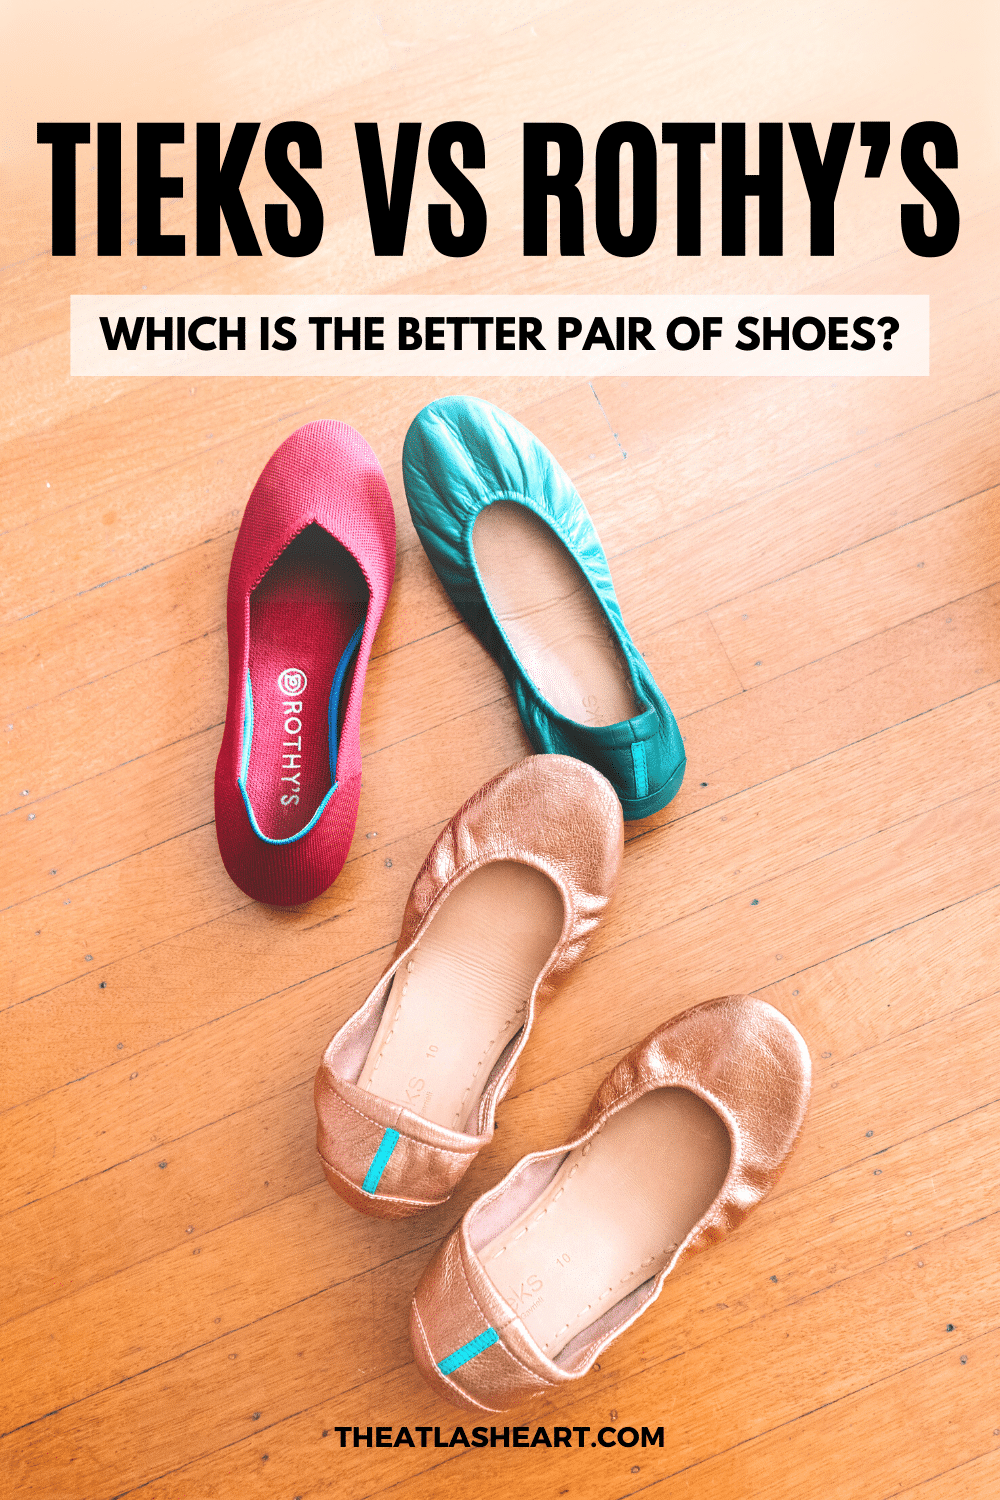 Tieks vs Rothy’s: Which is the Better Pair of Shoes?